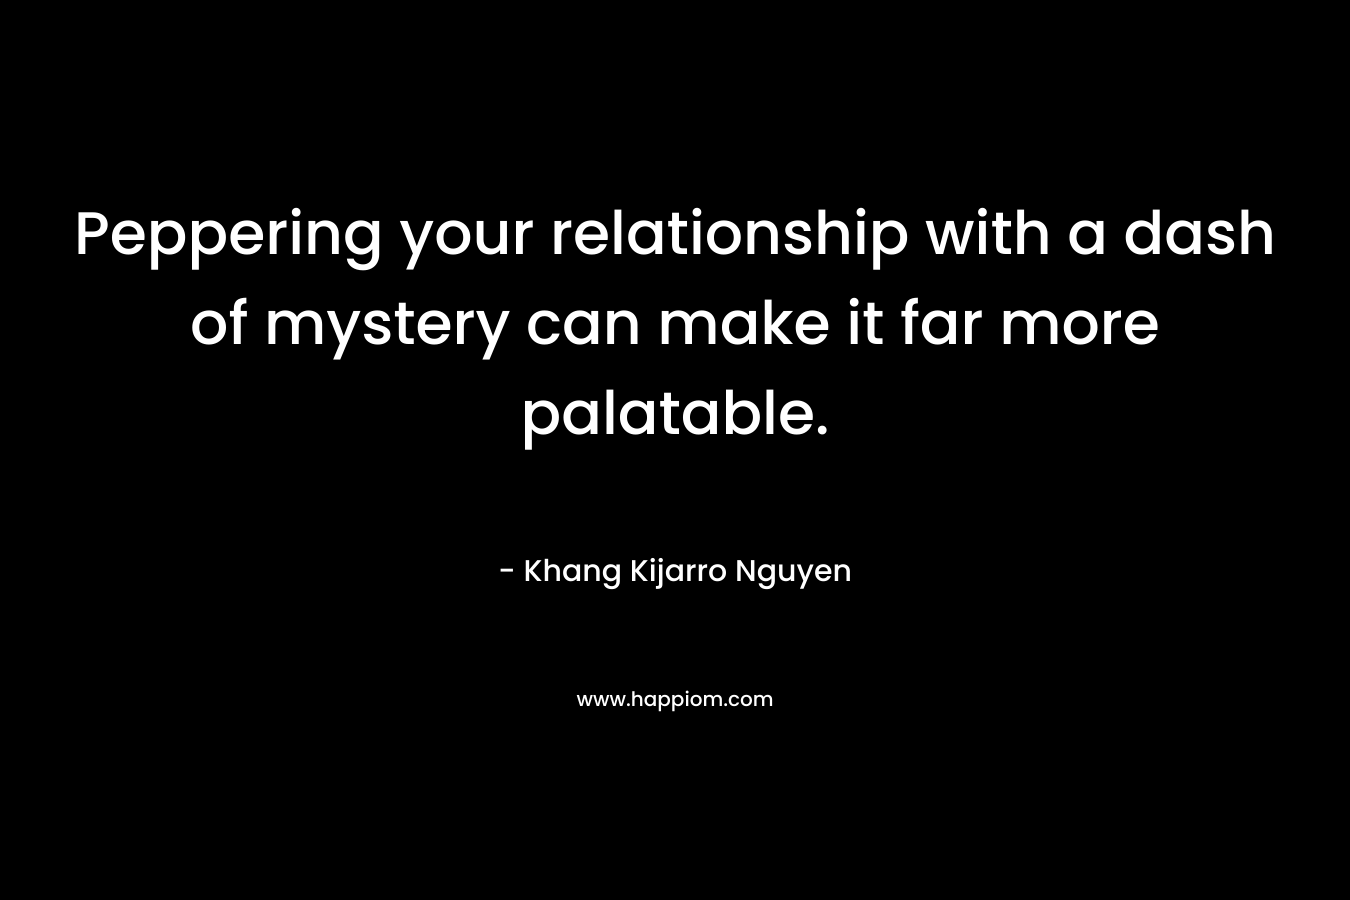 Peppering your relationship with a dash of mystery can make it far more palatable.